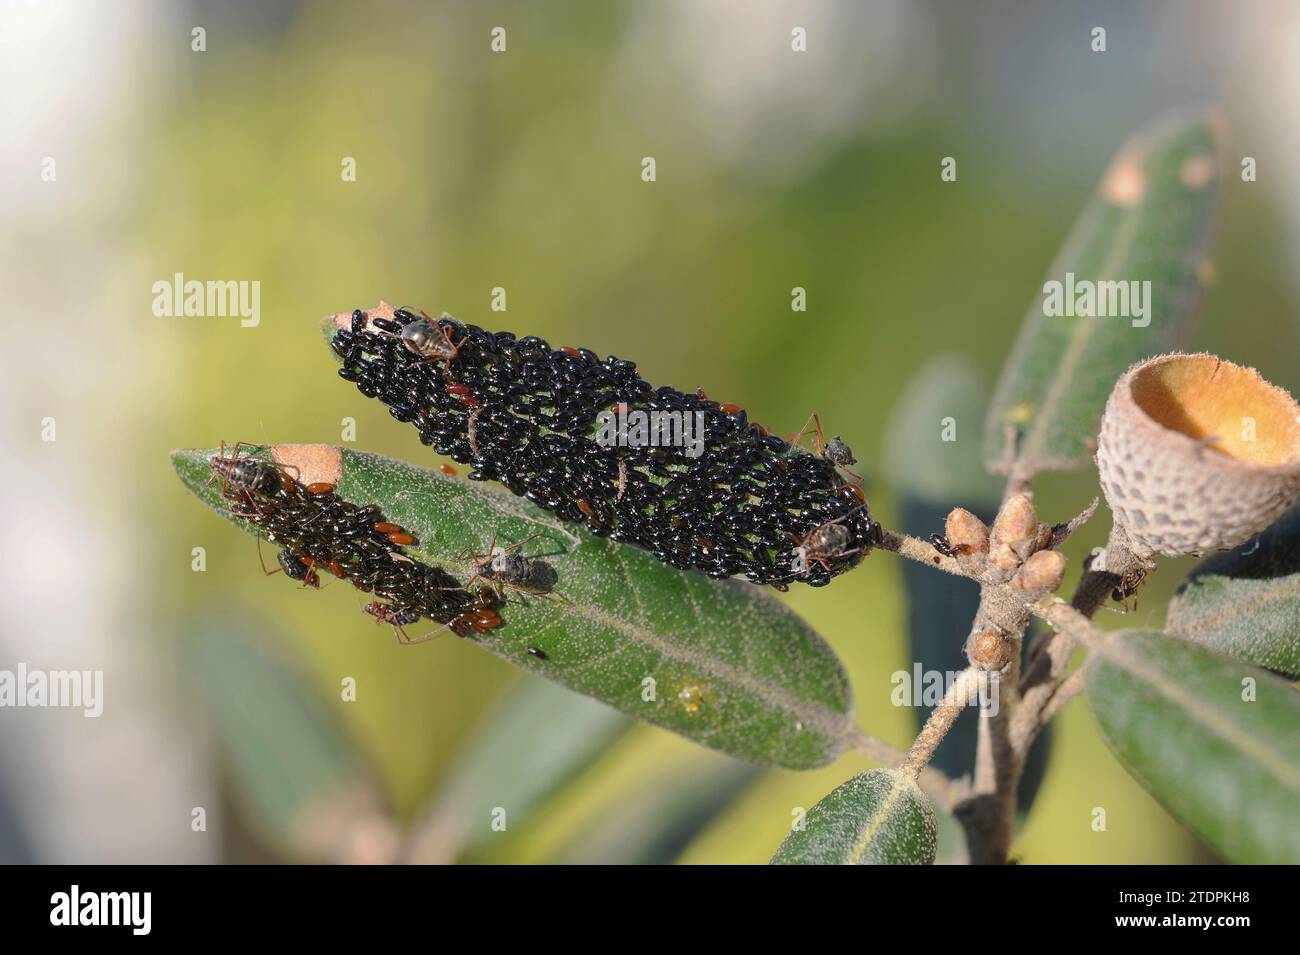 Aphids (Lachnus roboris), adults and eggs on a leaves of evergreen oak. This photo was taken in Sant Miquel del Fai, Barcelona province, Catalonia, Sp Stock Photo